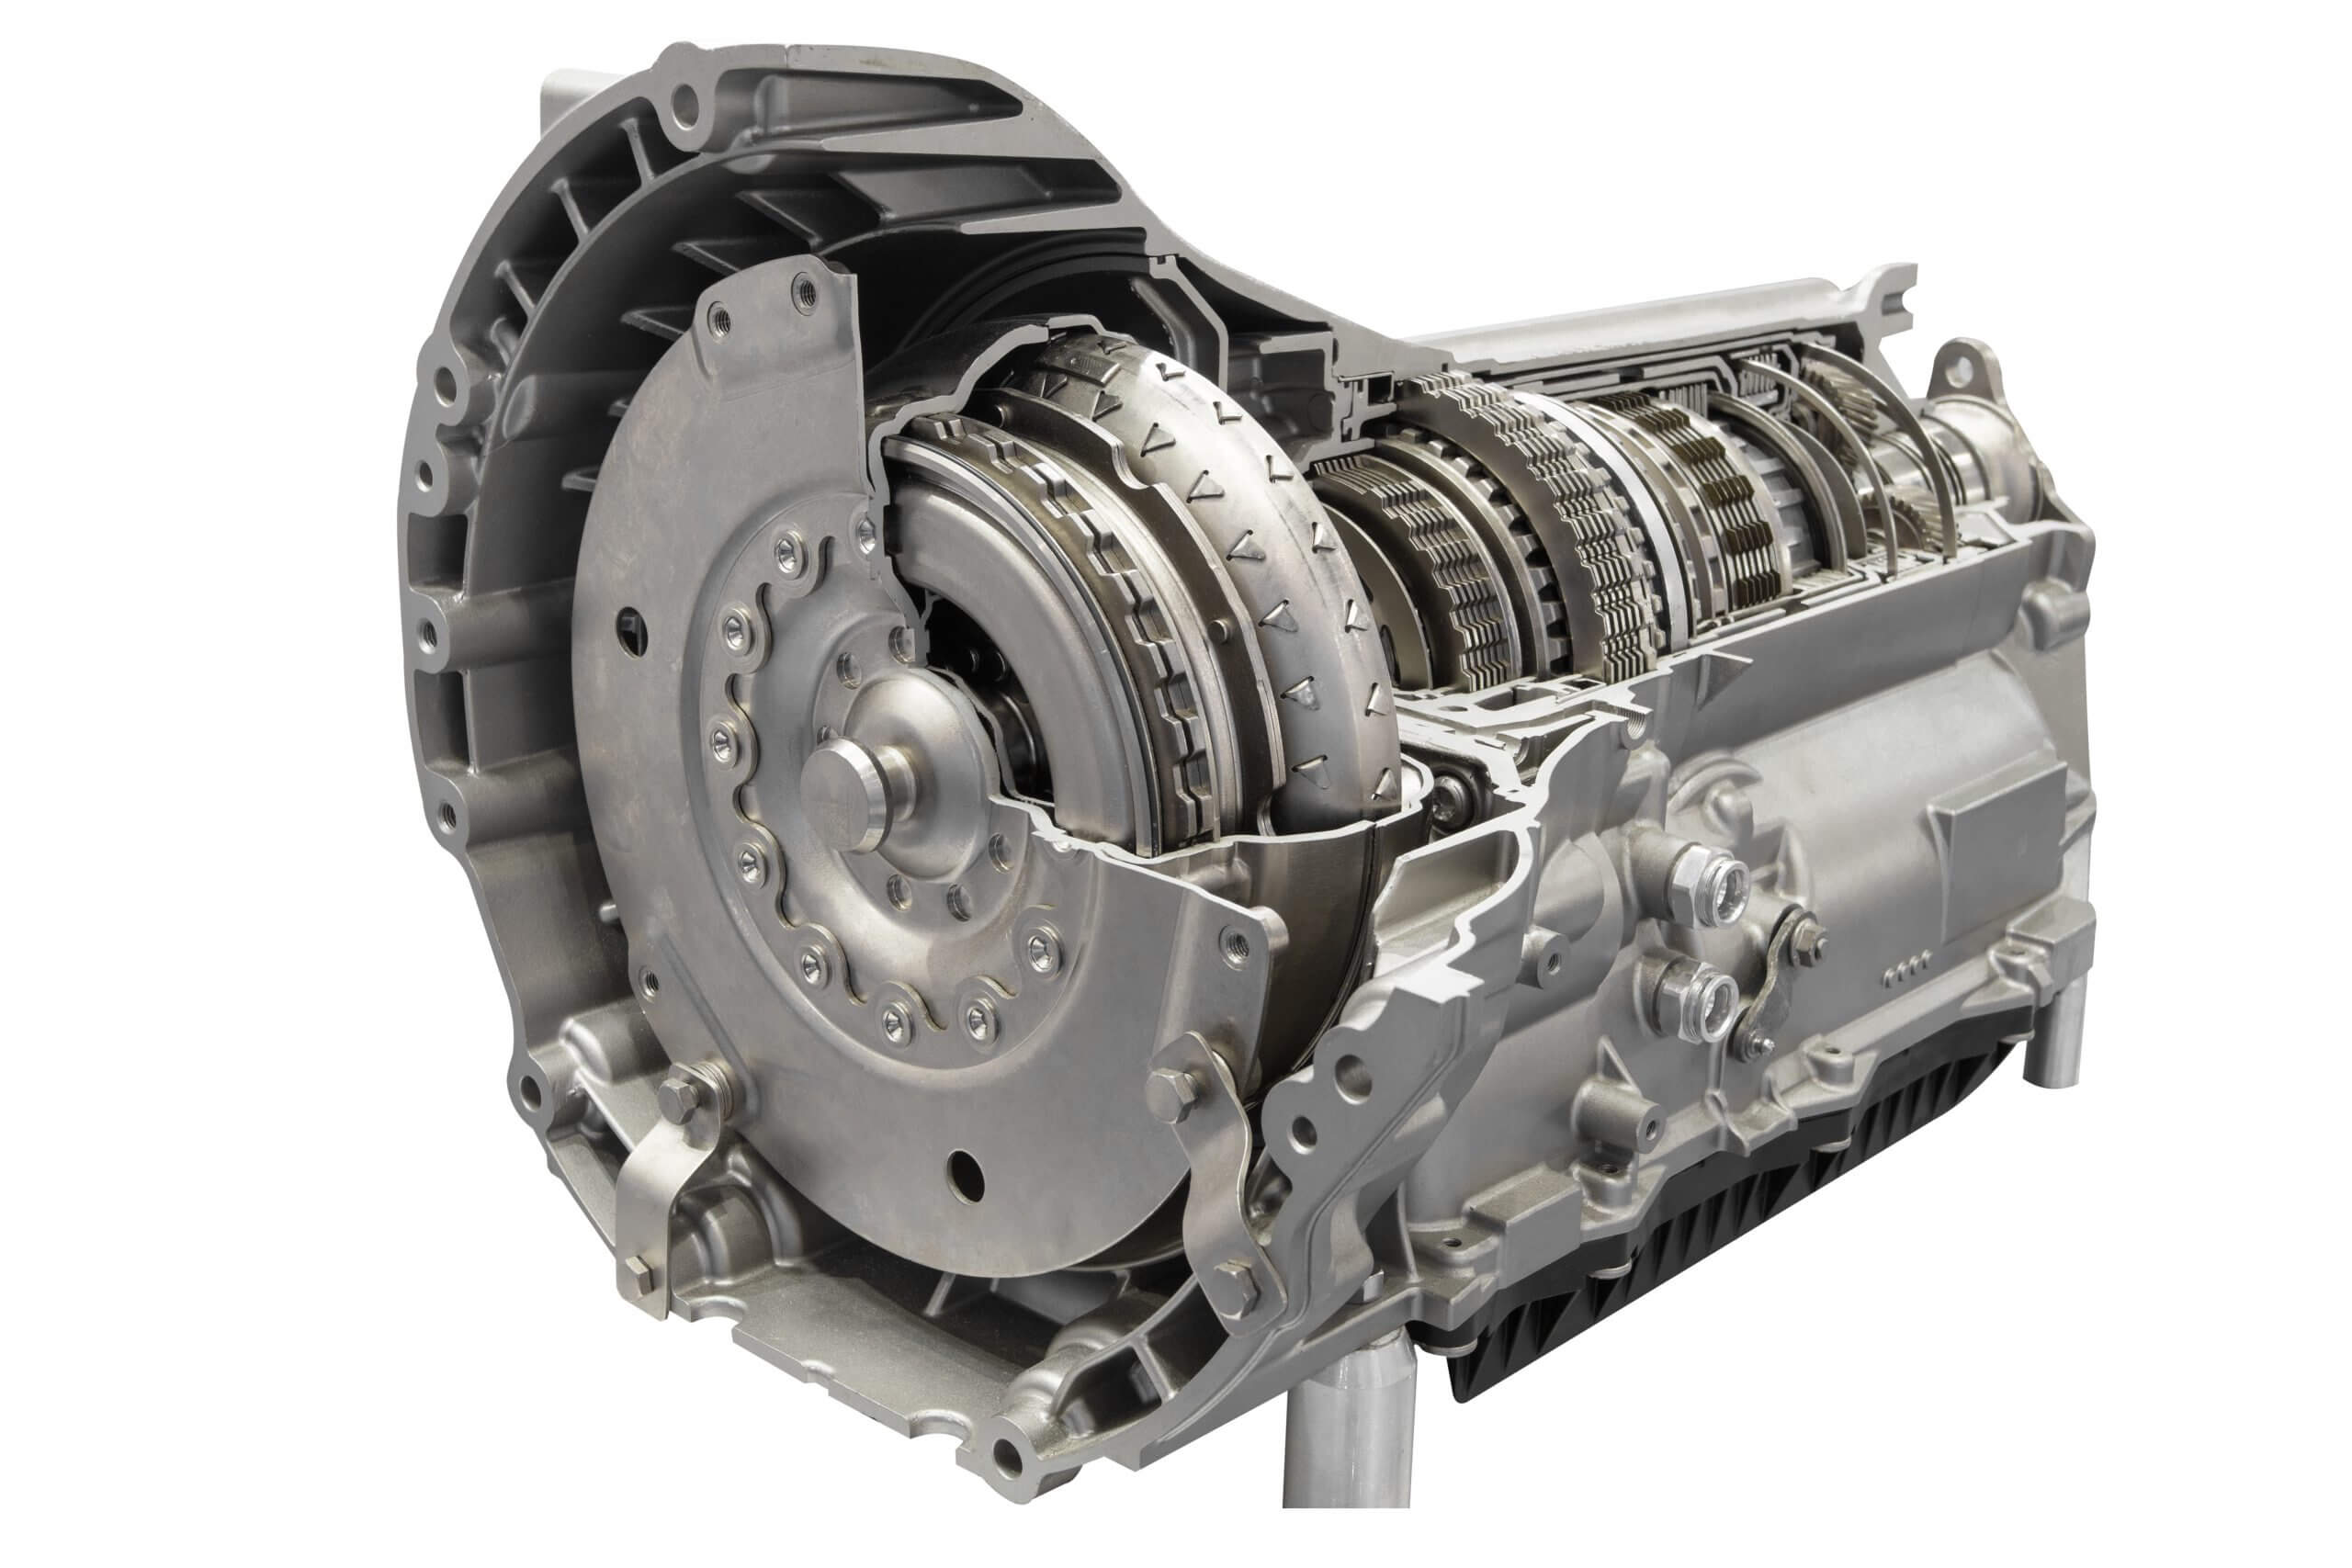 Cross section of a clutch and gearbox in transmission part isolated on a white background with clipping path